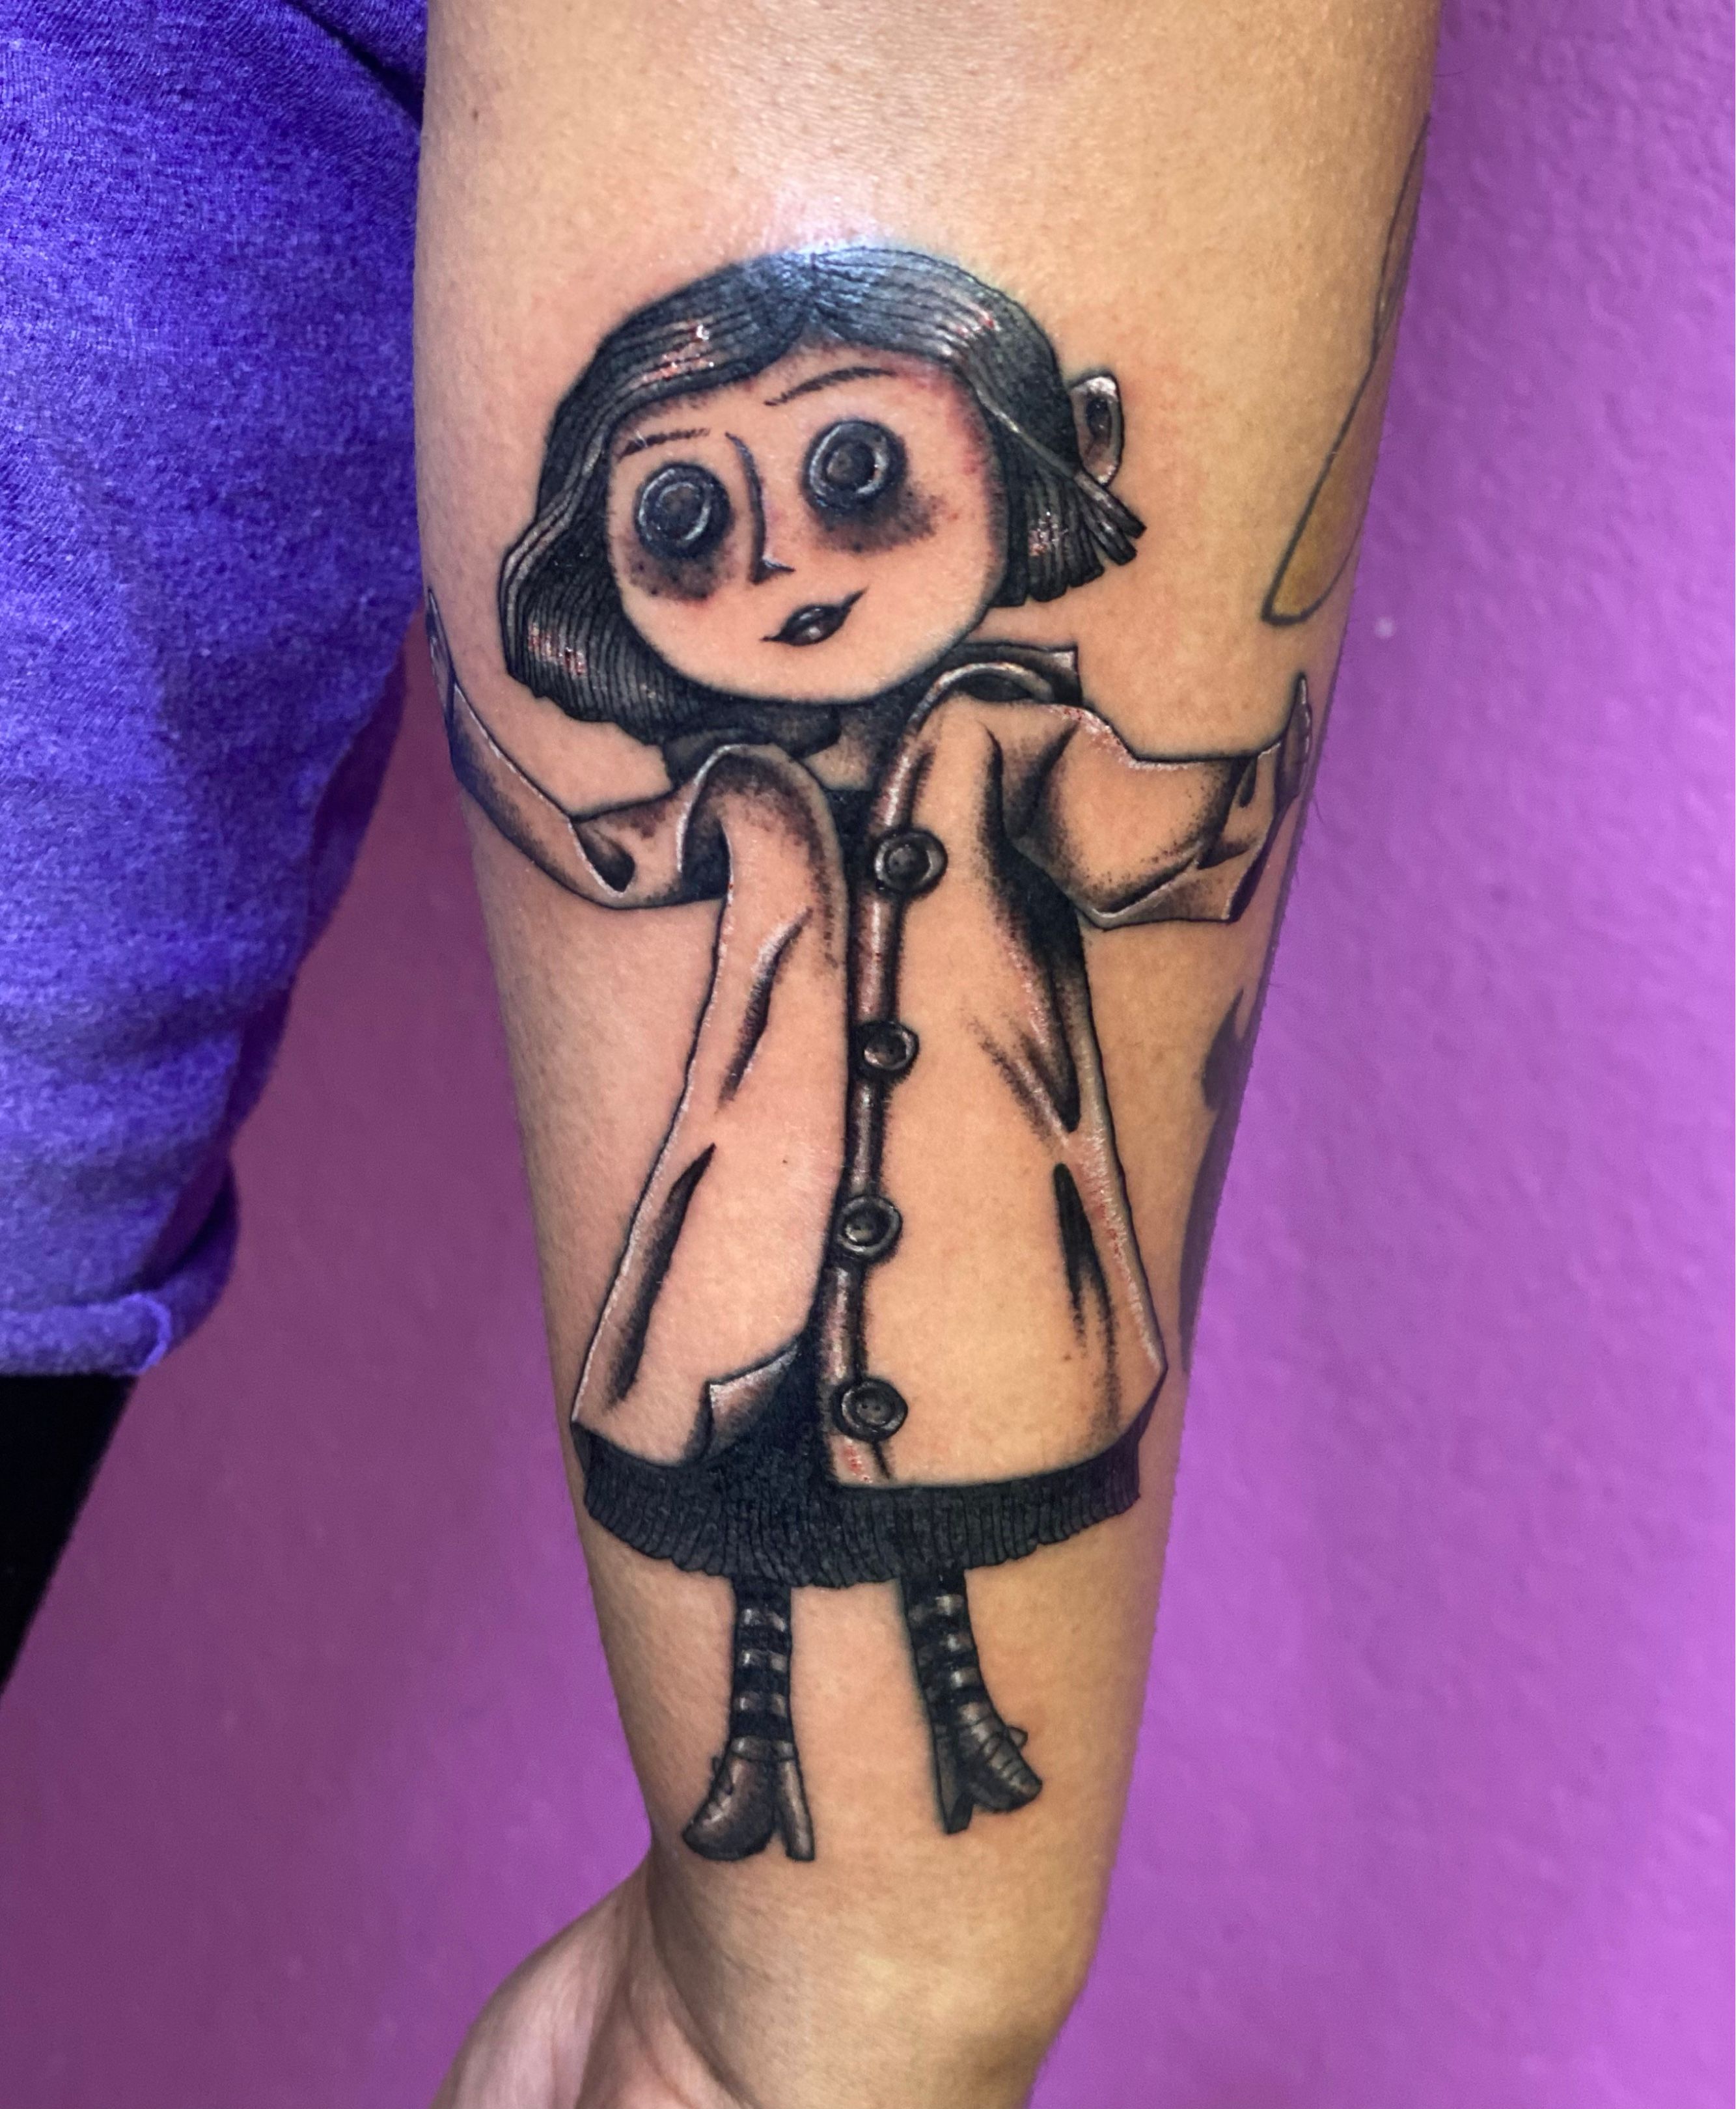 coraline in Tattoos  Search in 13M Tattoos Now  Tattoodo